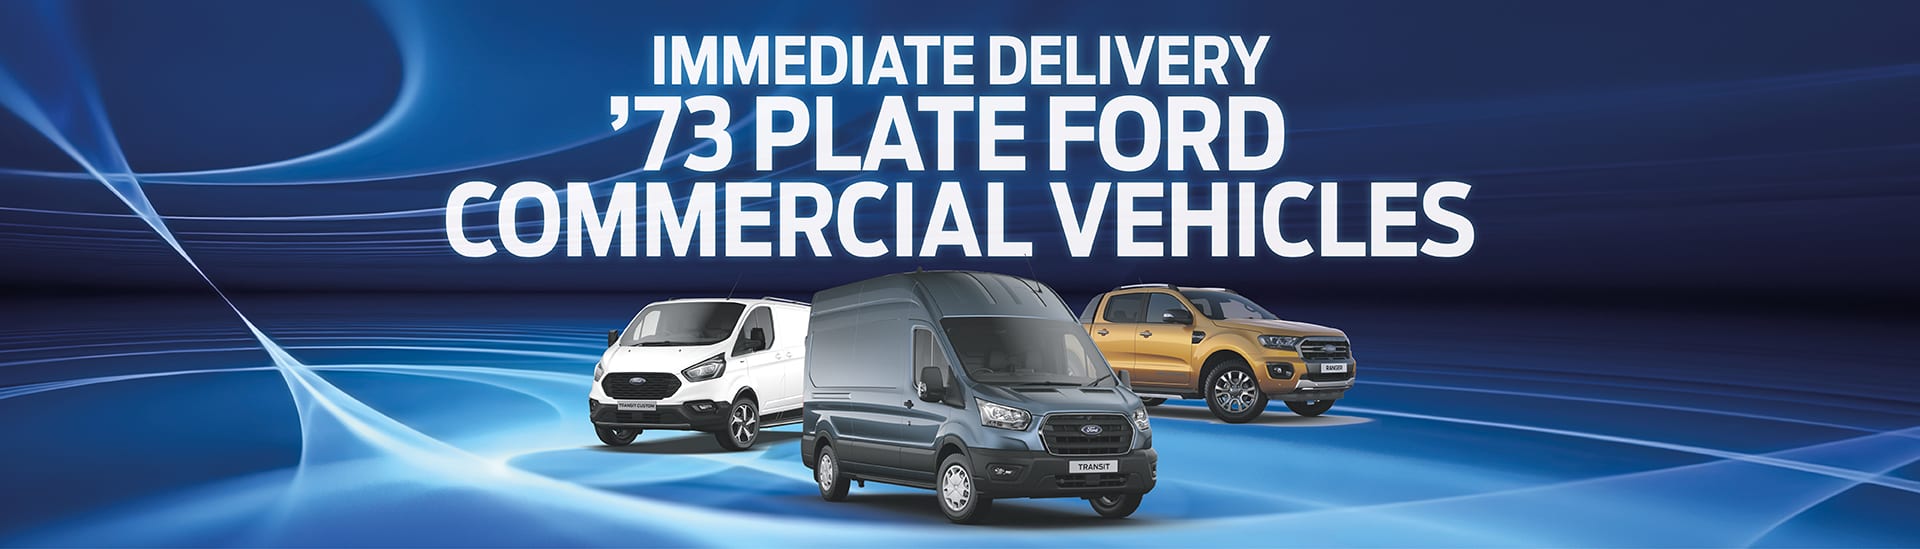 Ford Transit immediate delivery 